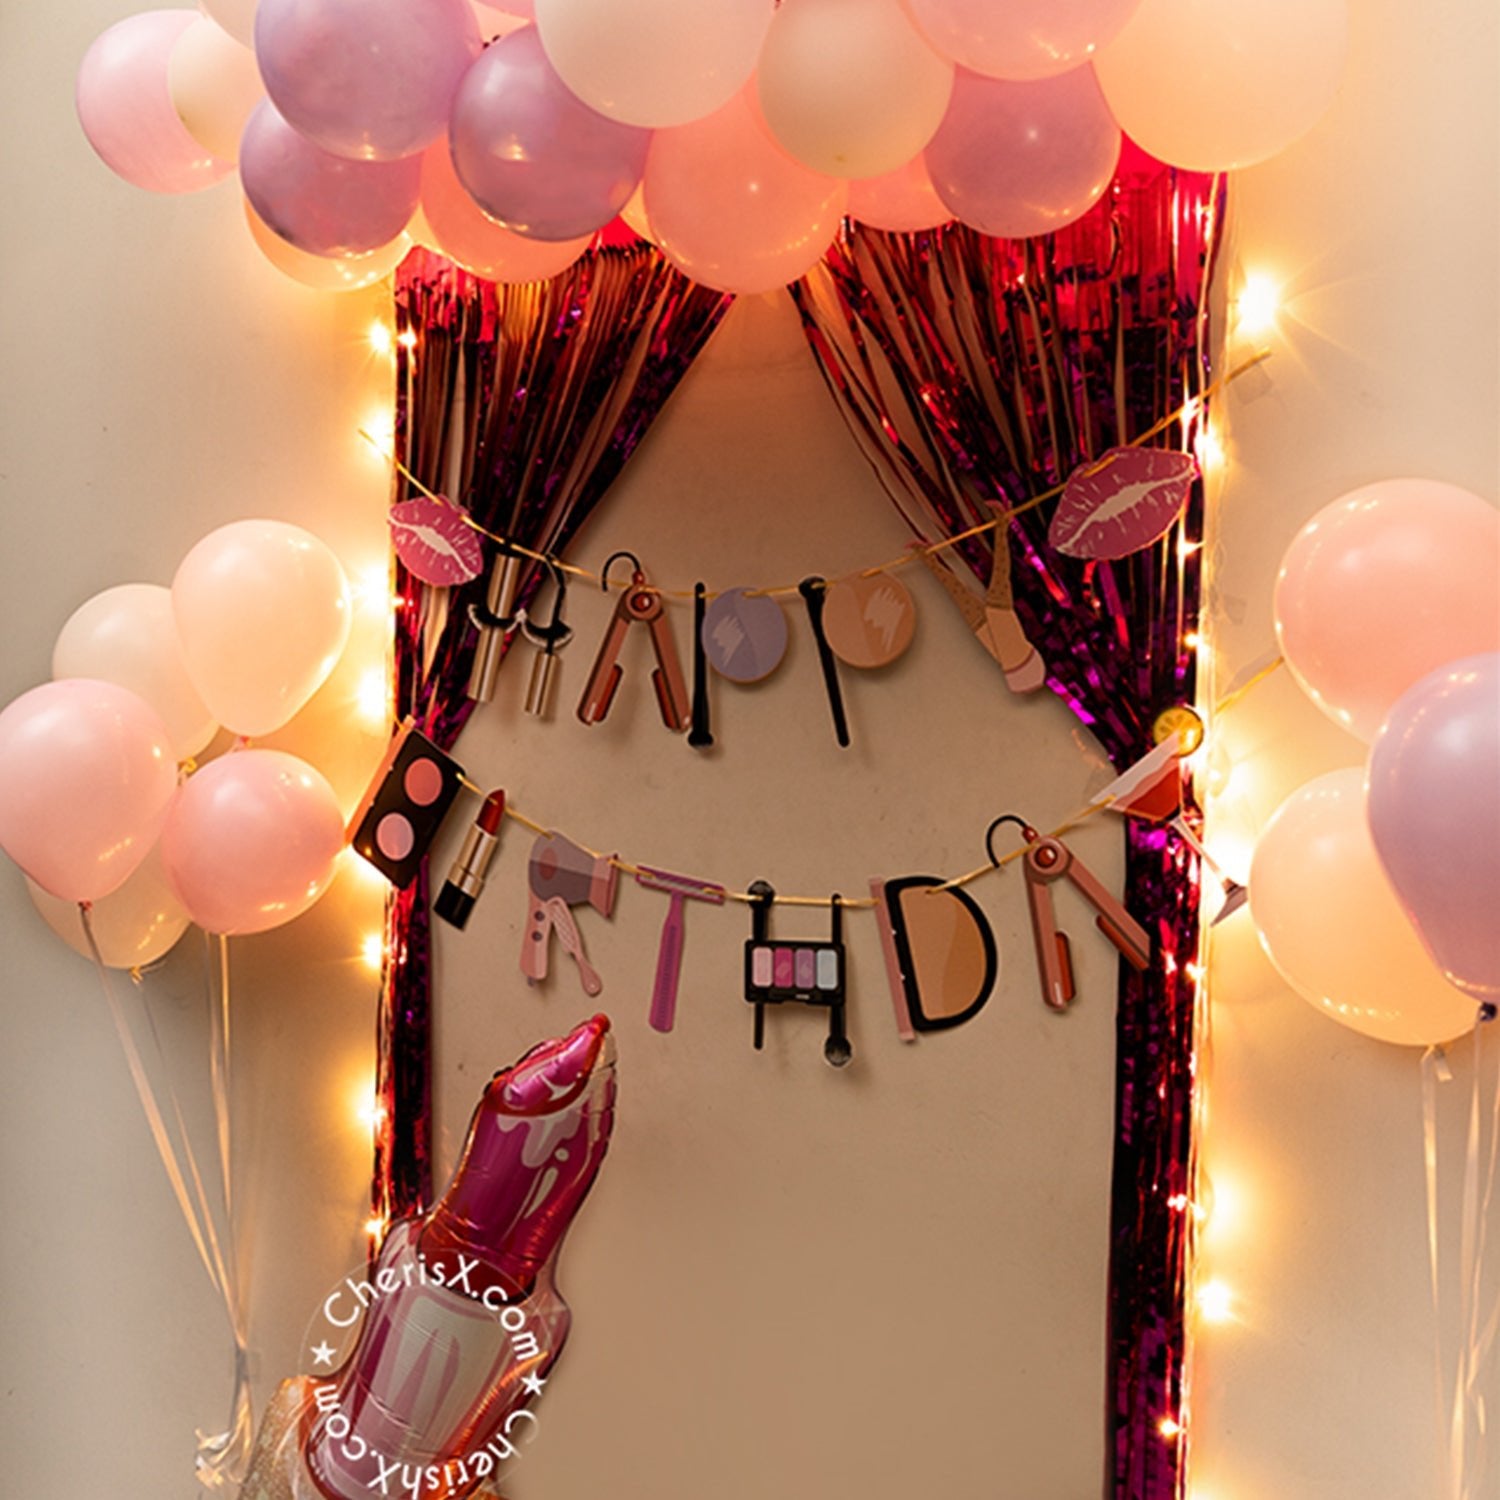 Pink and white theme birthday decoration items with fringe curtain